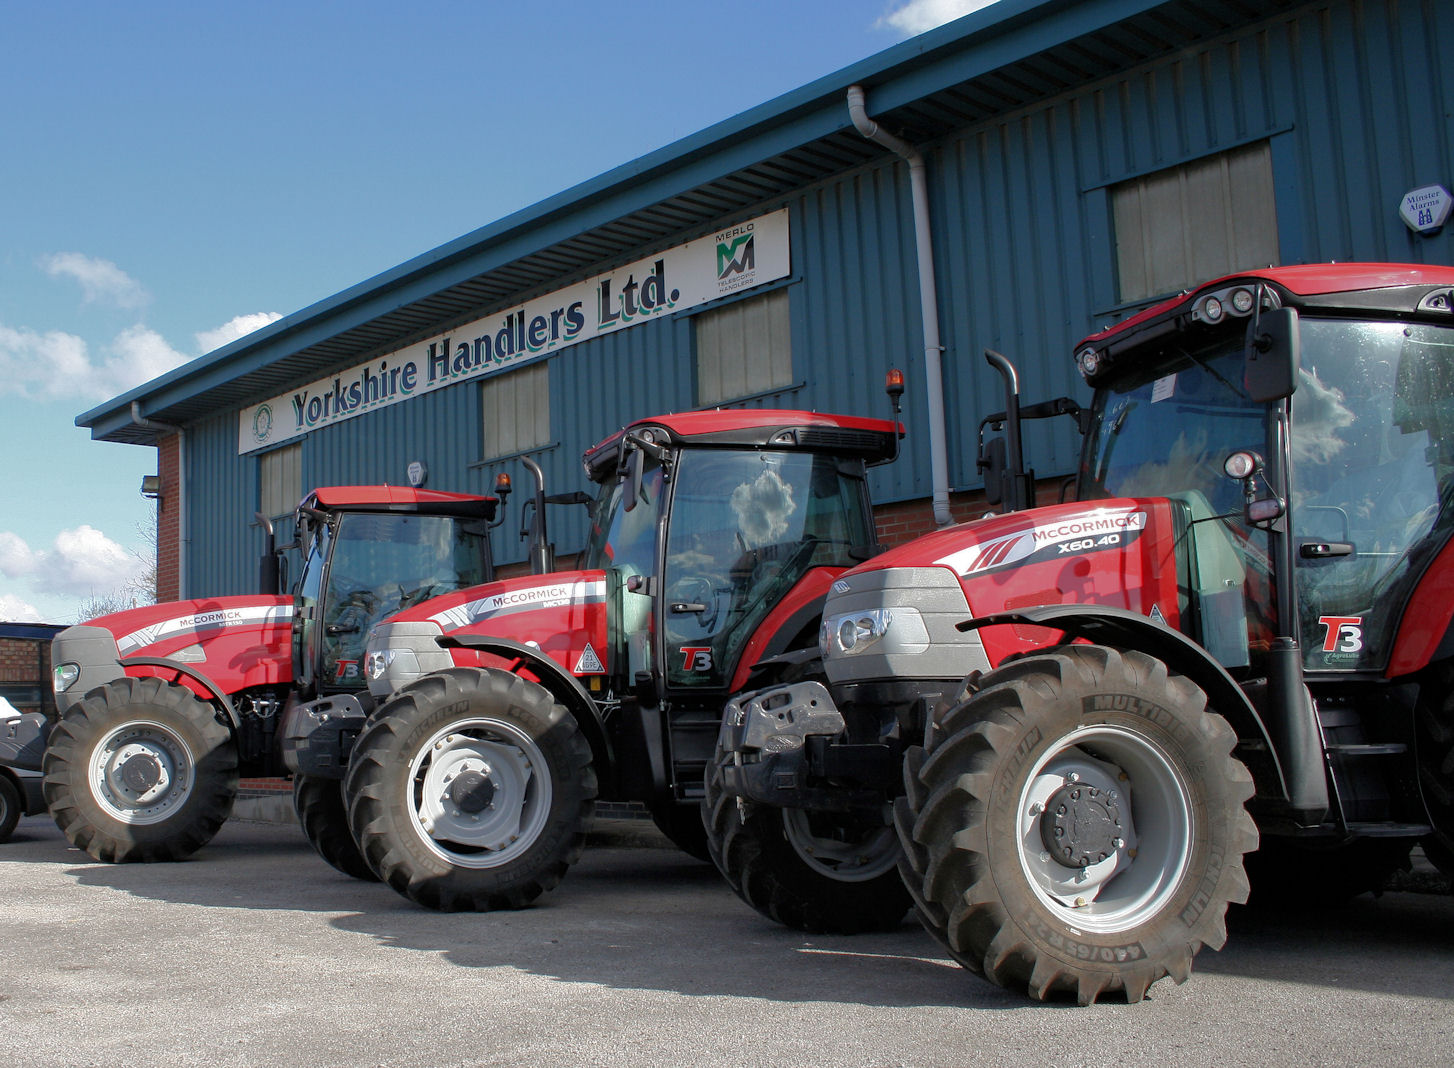 A line-up of new McCormick tractors at the Murton premises of new sales and service support dealer Yorkshire Handlers.